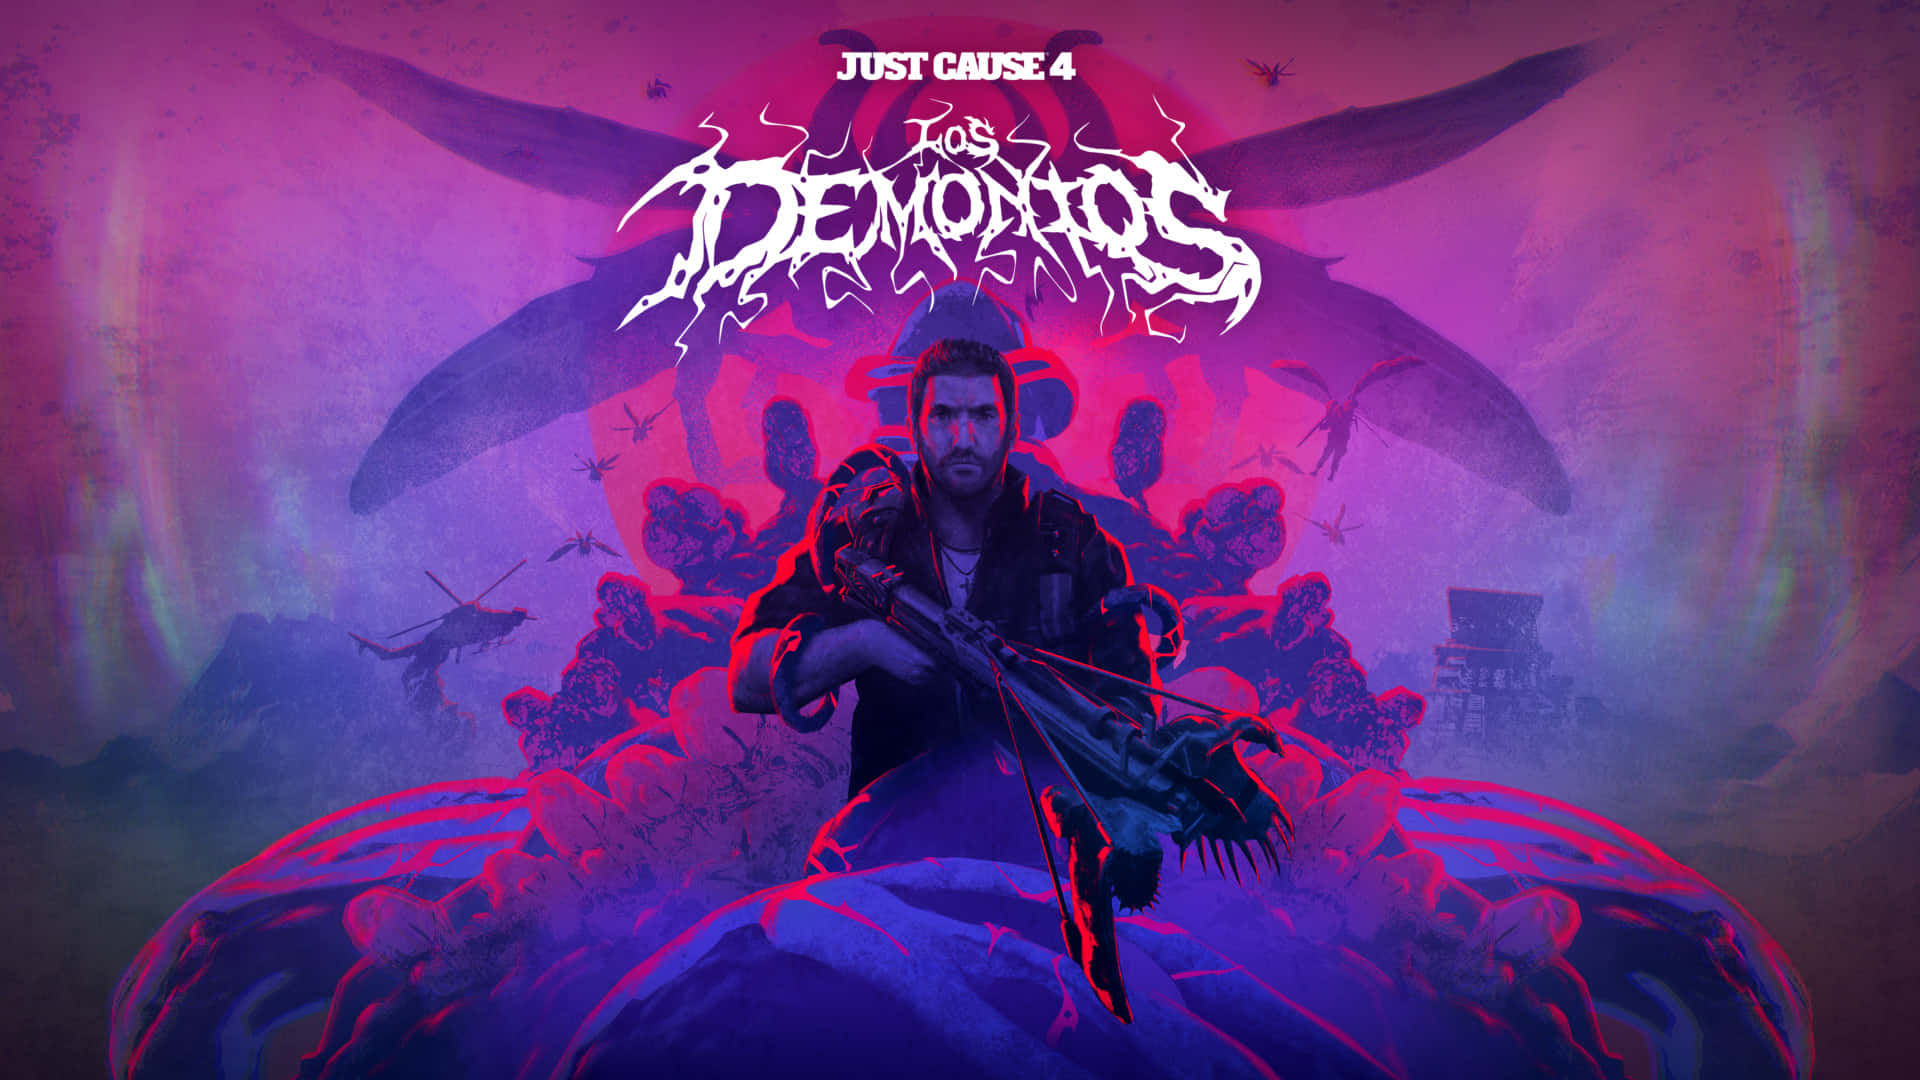 The Demons - Ps4 - Ps4 - Ps4 - Ps4 - P